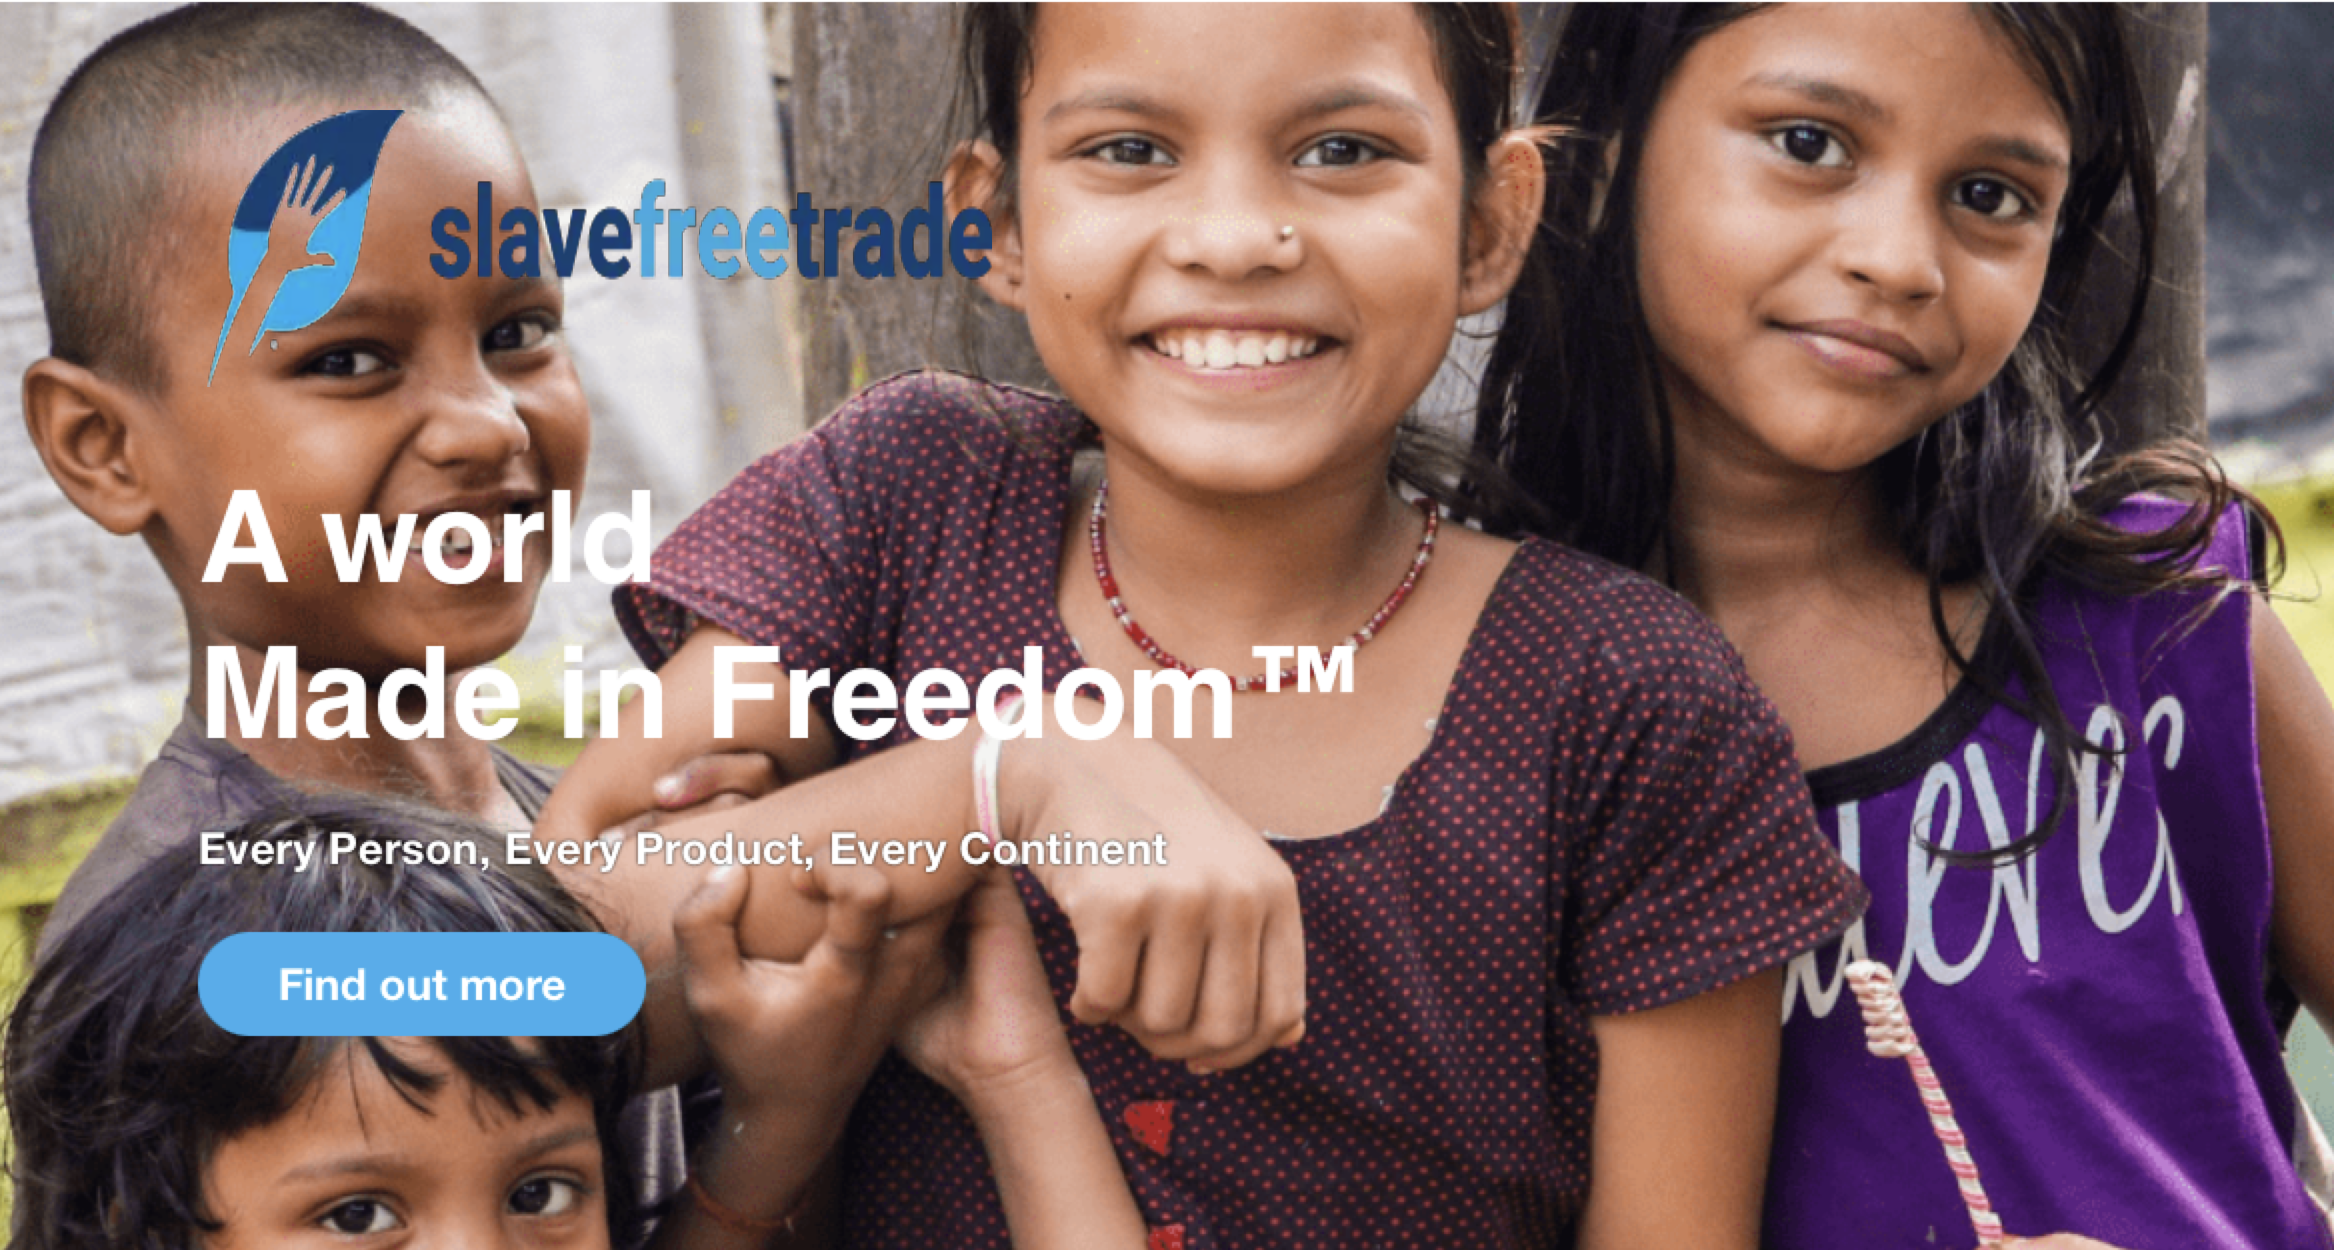 Slavefreetrade — From supply-side measures to diminishing demand, the only way to really fight human trafficking worldwide effectively ! Brian Iselin, pioneer in rights-tech project against human trafficking